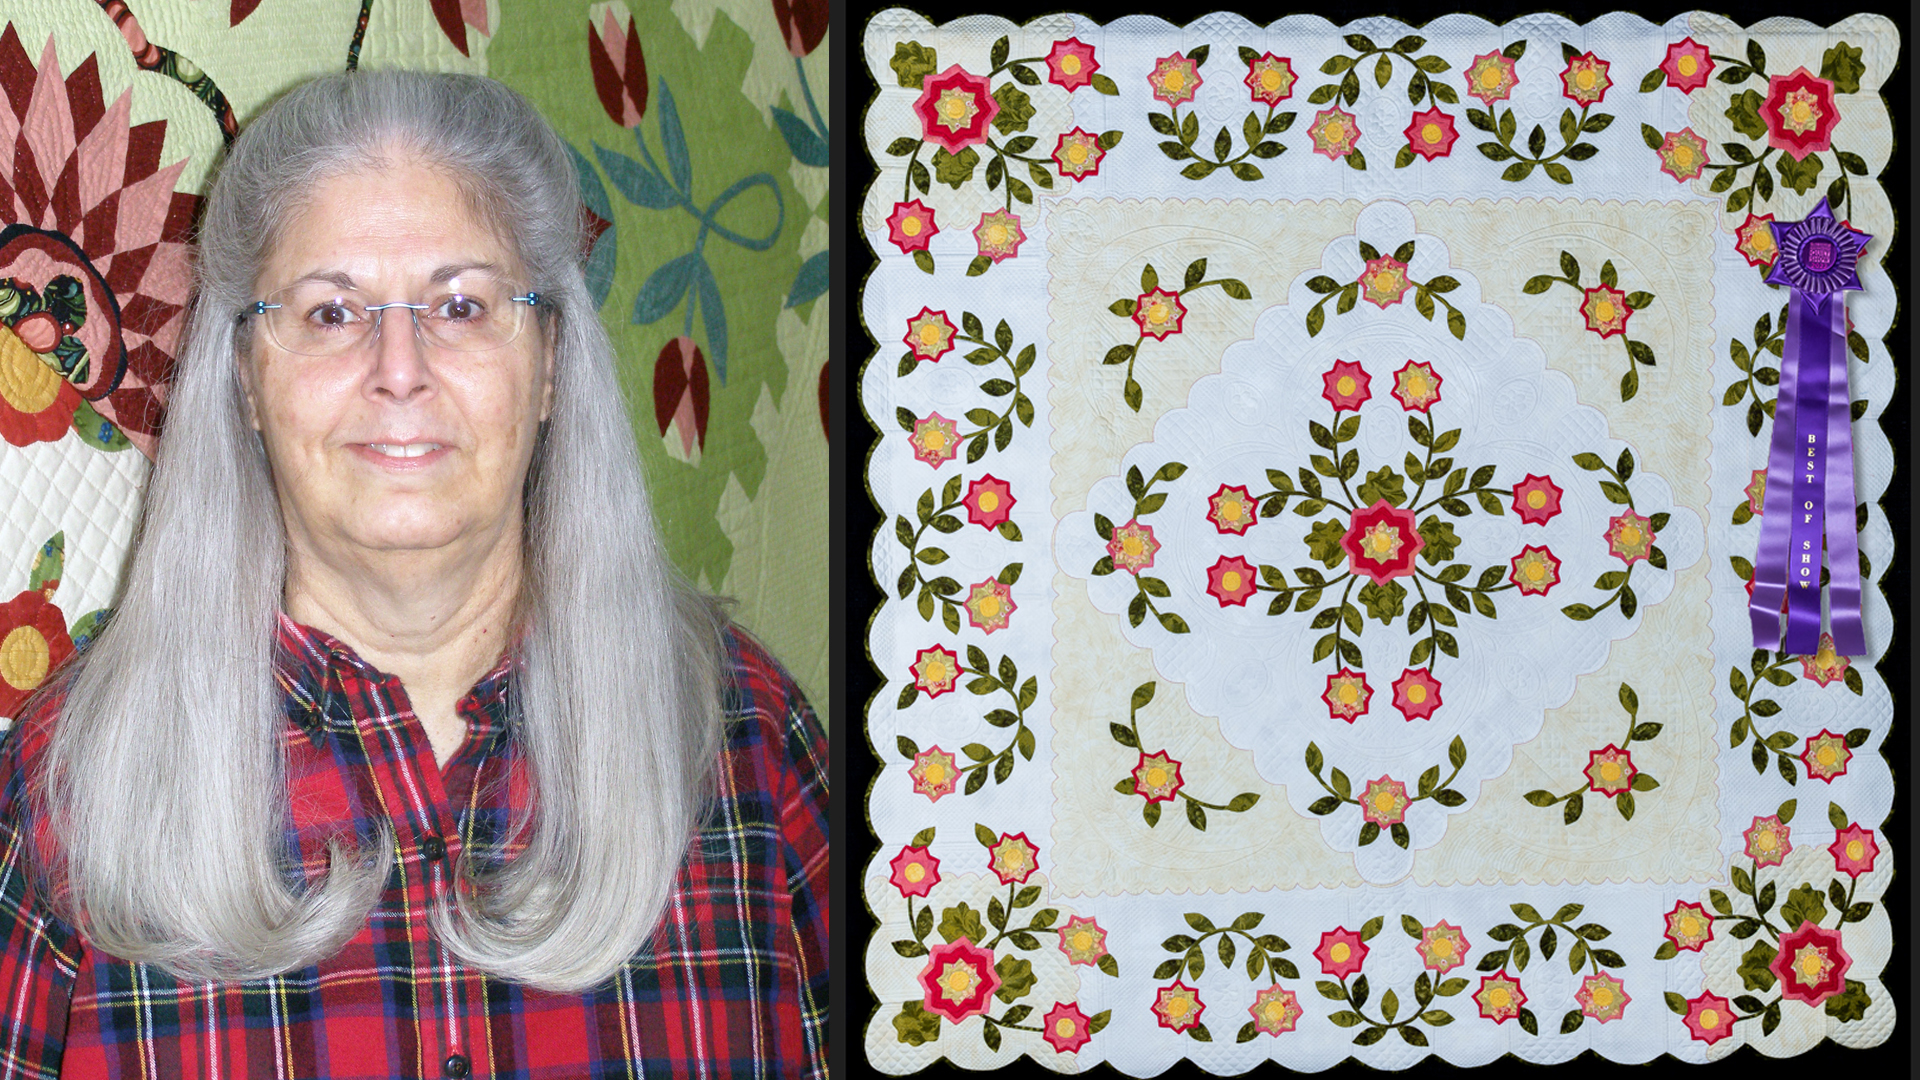 Barbara Clem and her quilt, "Lullaby in 3/4 Time," a floral yellow, white and red medallion quilt.